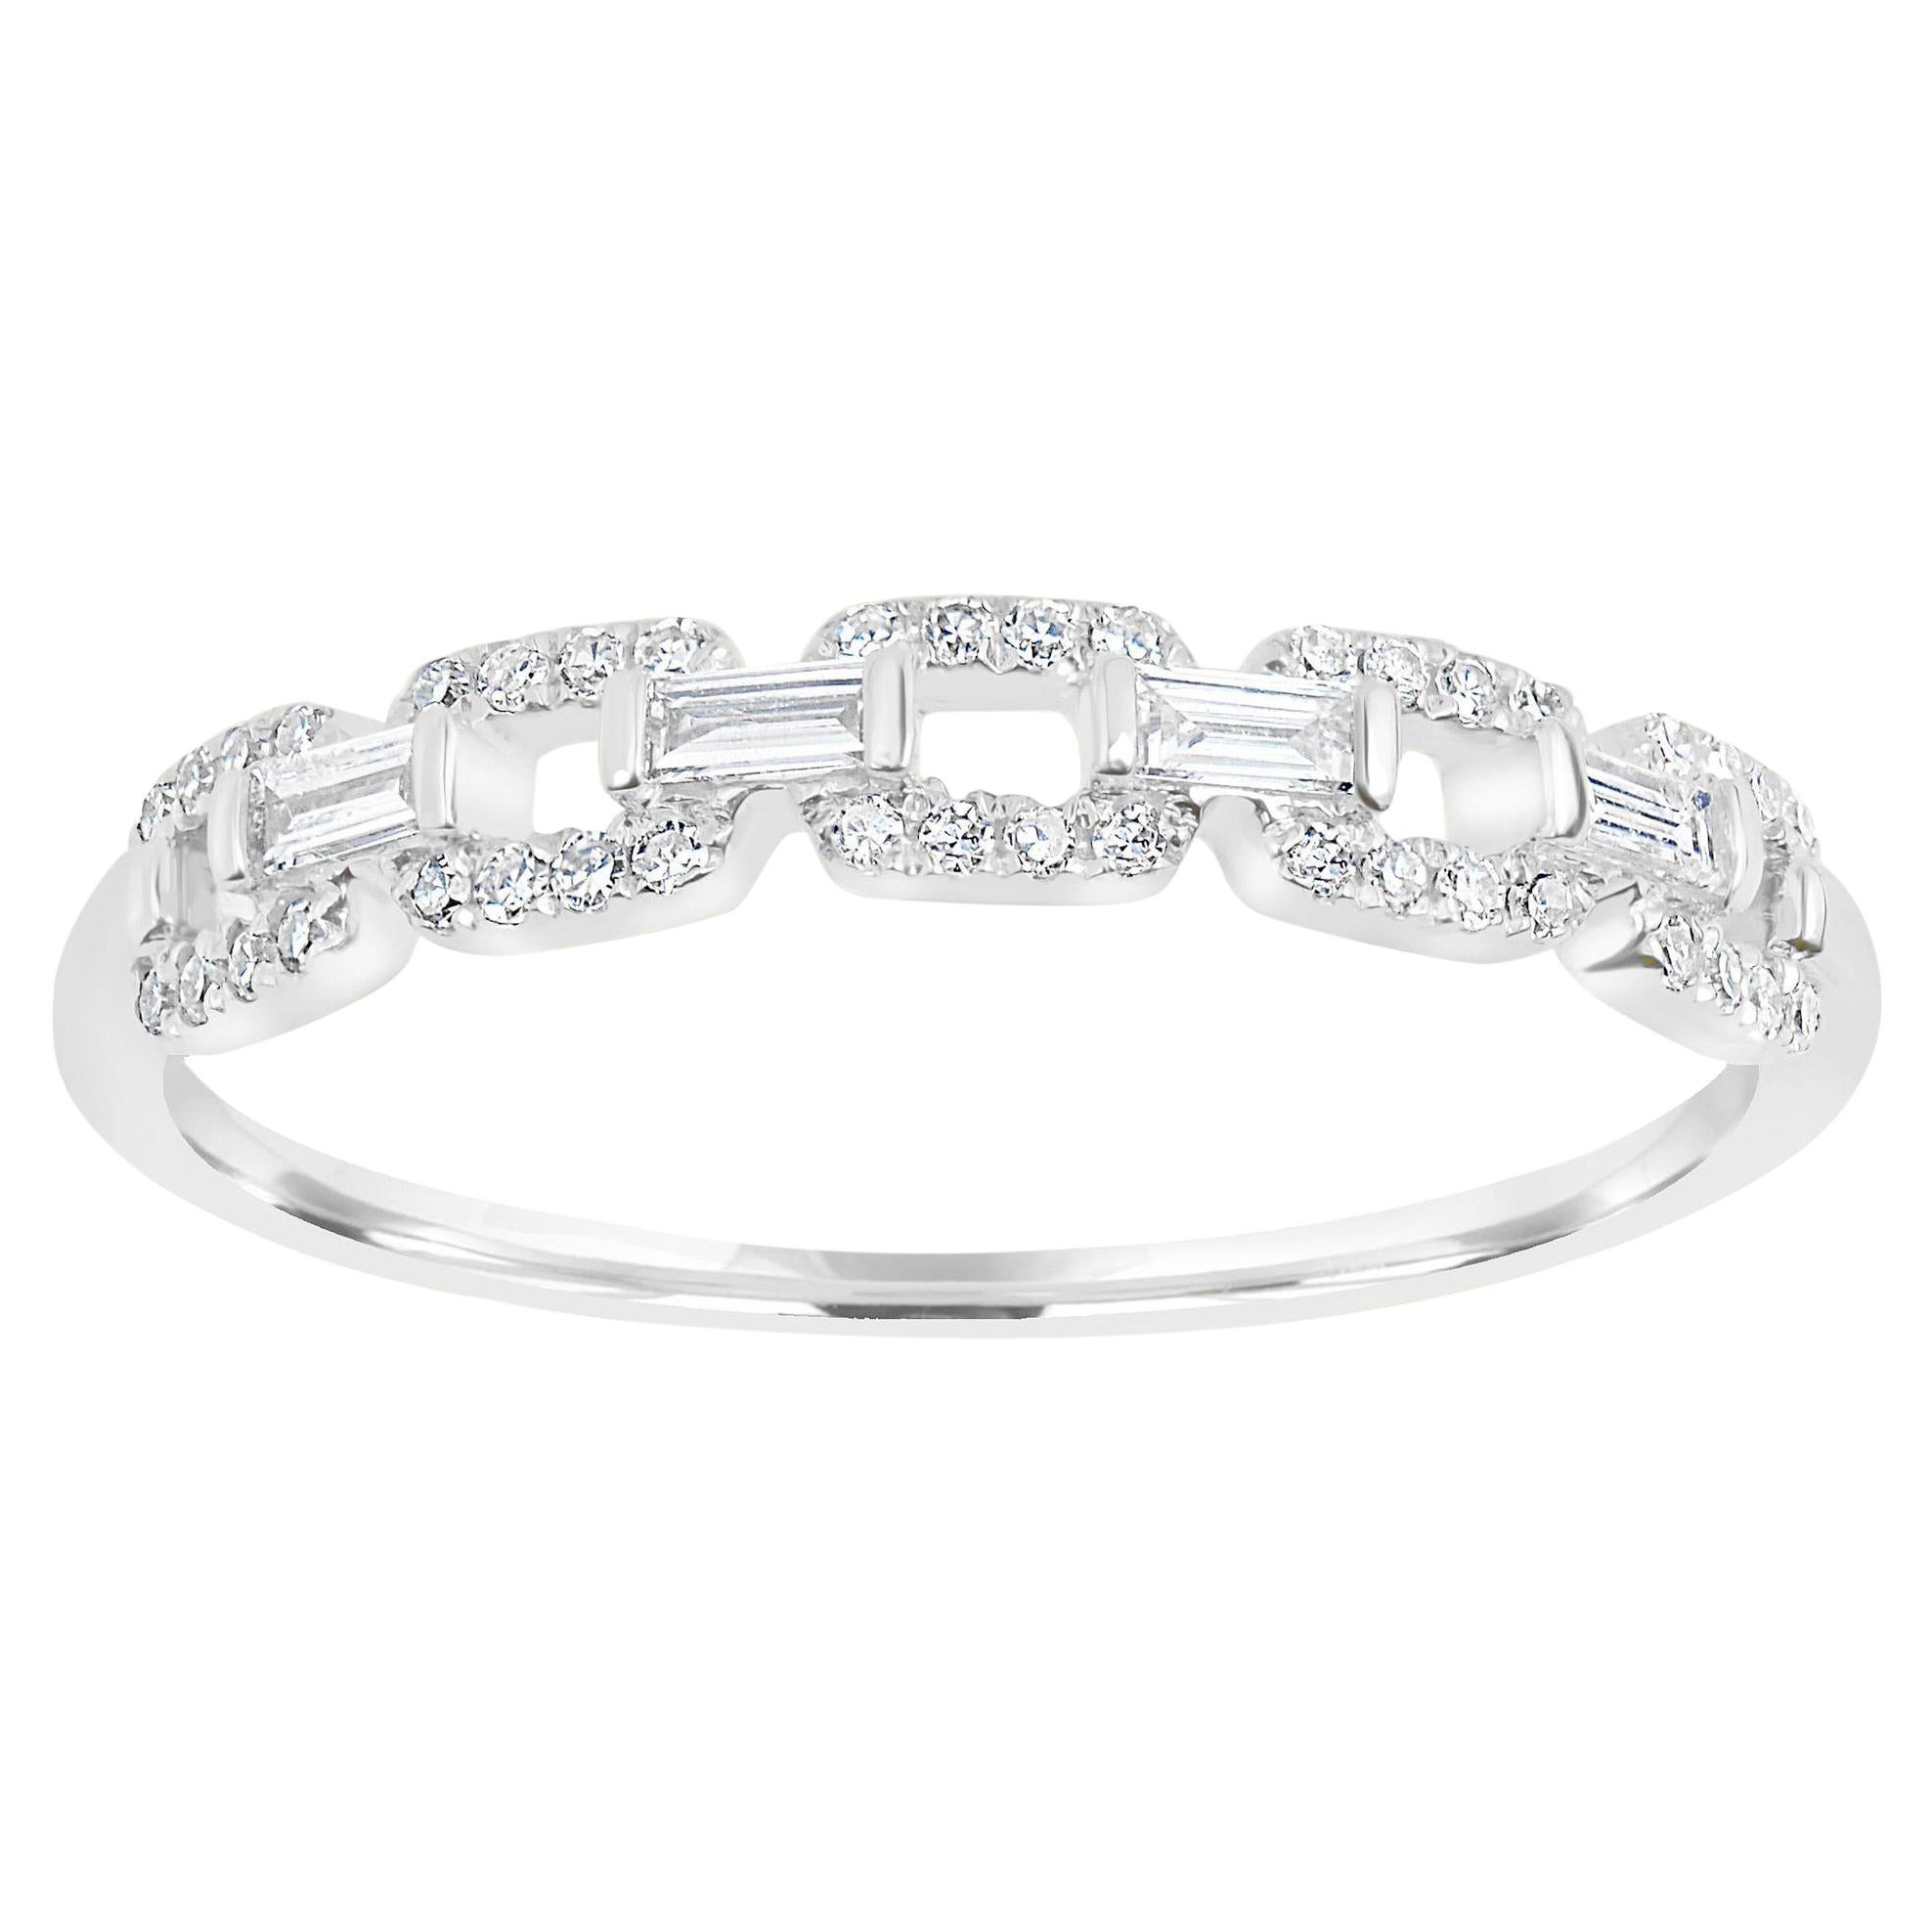 Luxle Round and Baguette Diamond Link Band Ring in 14k White Gold